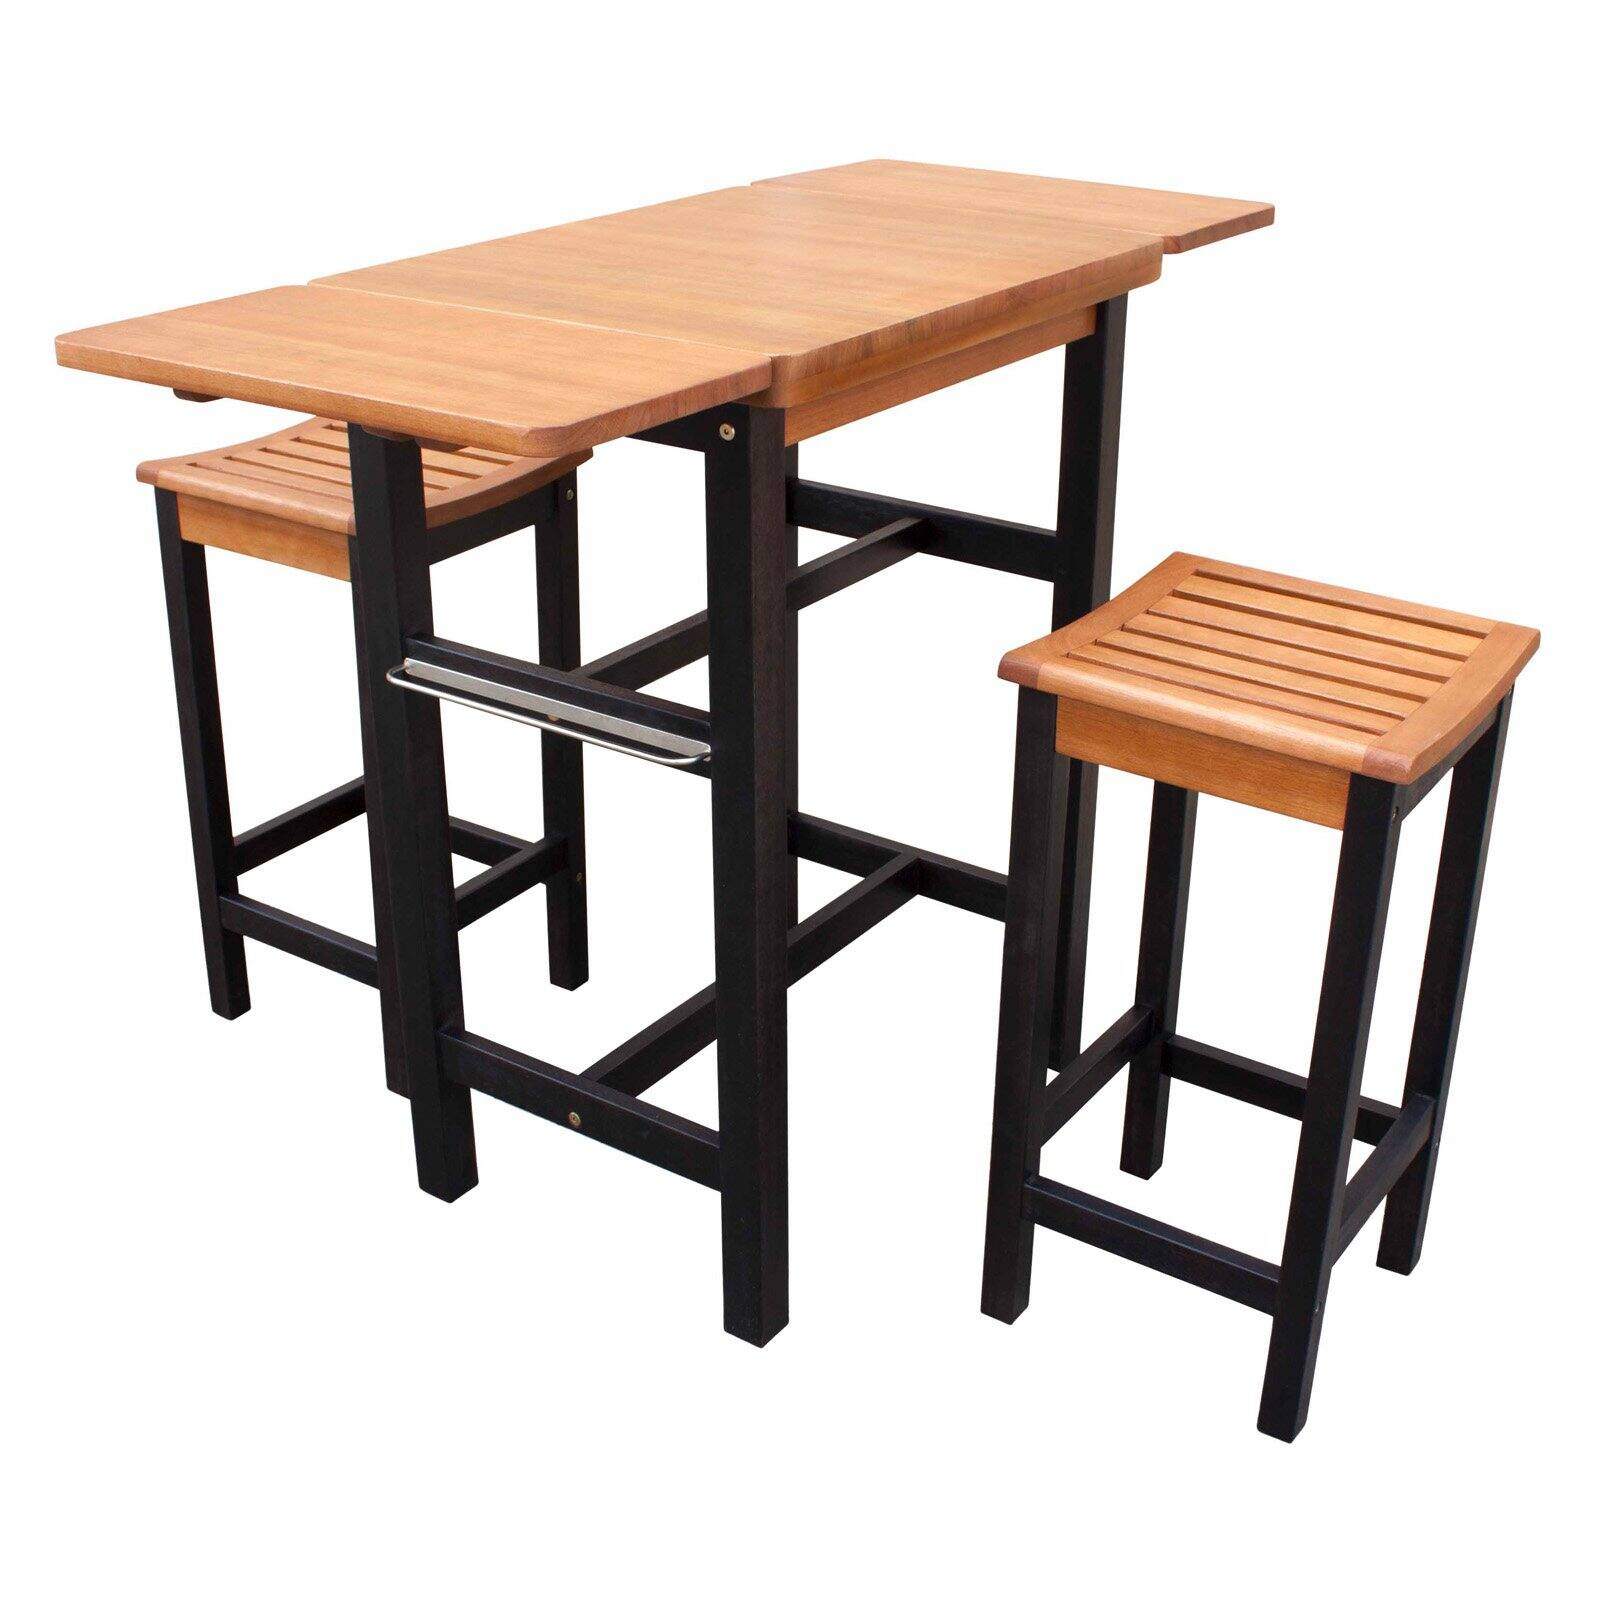 Merry Products 3-Piece Kitchen Island and Stool Set - image 4 of 4